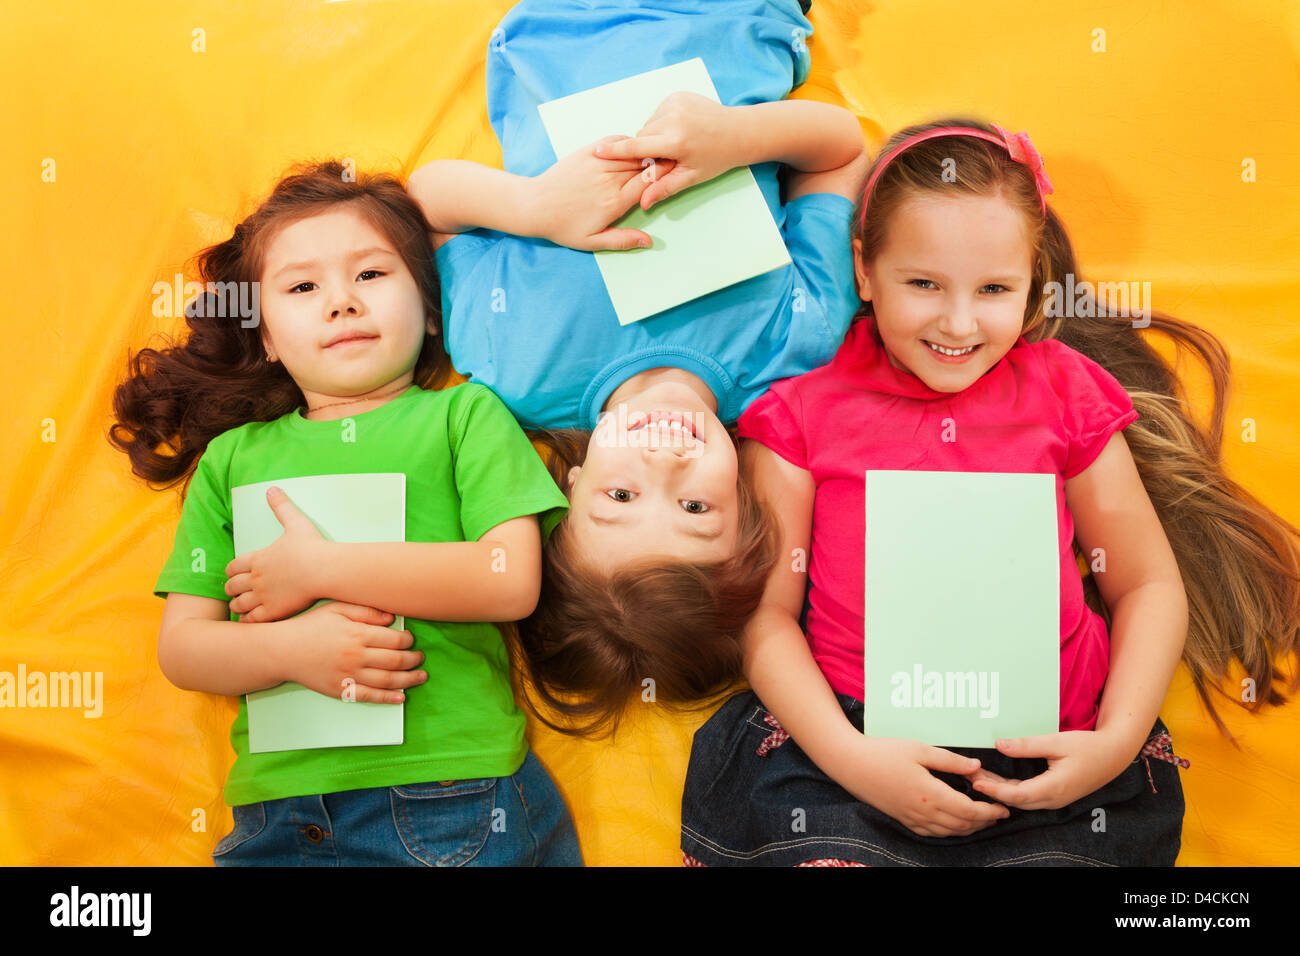 Three little kids, boys and girls, laying with books on the yellow mattress, smiling, with long hair, Stock Photo